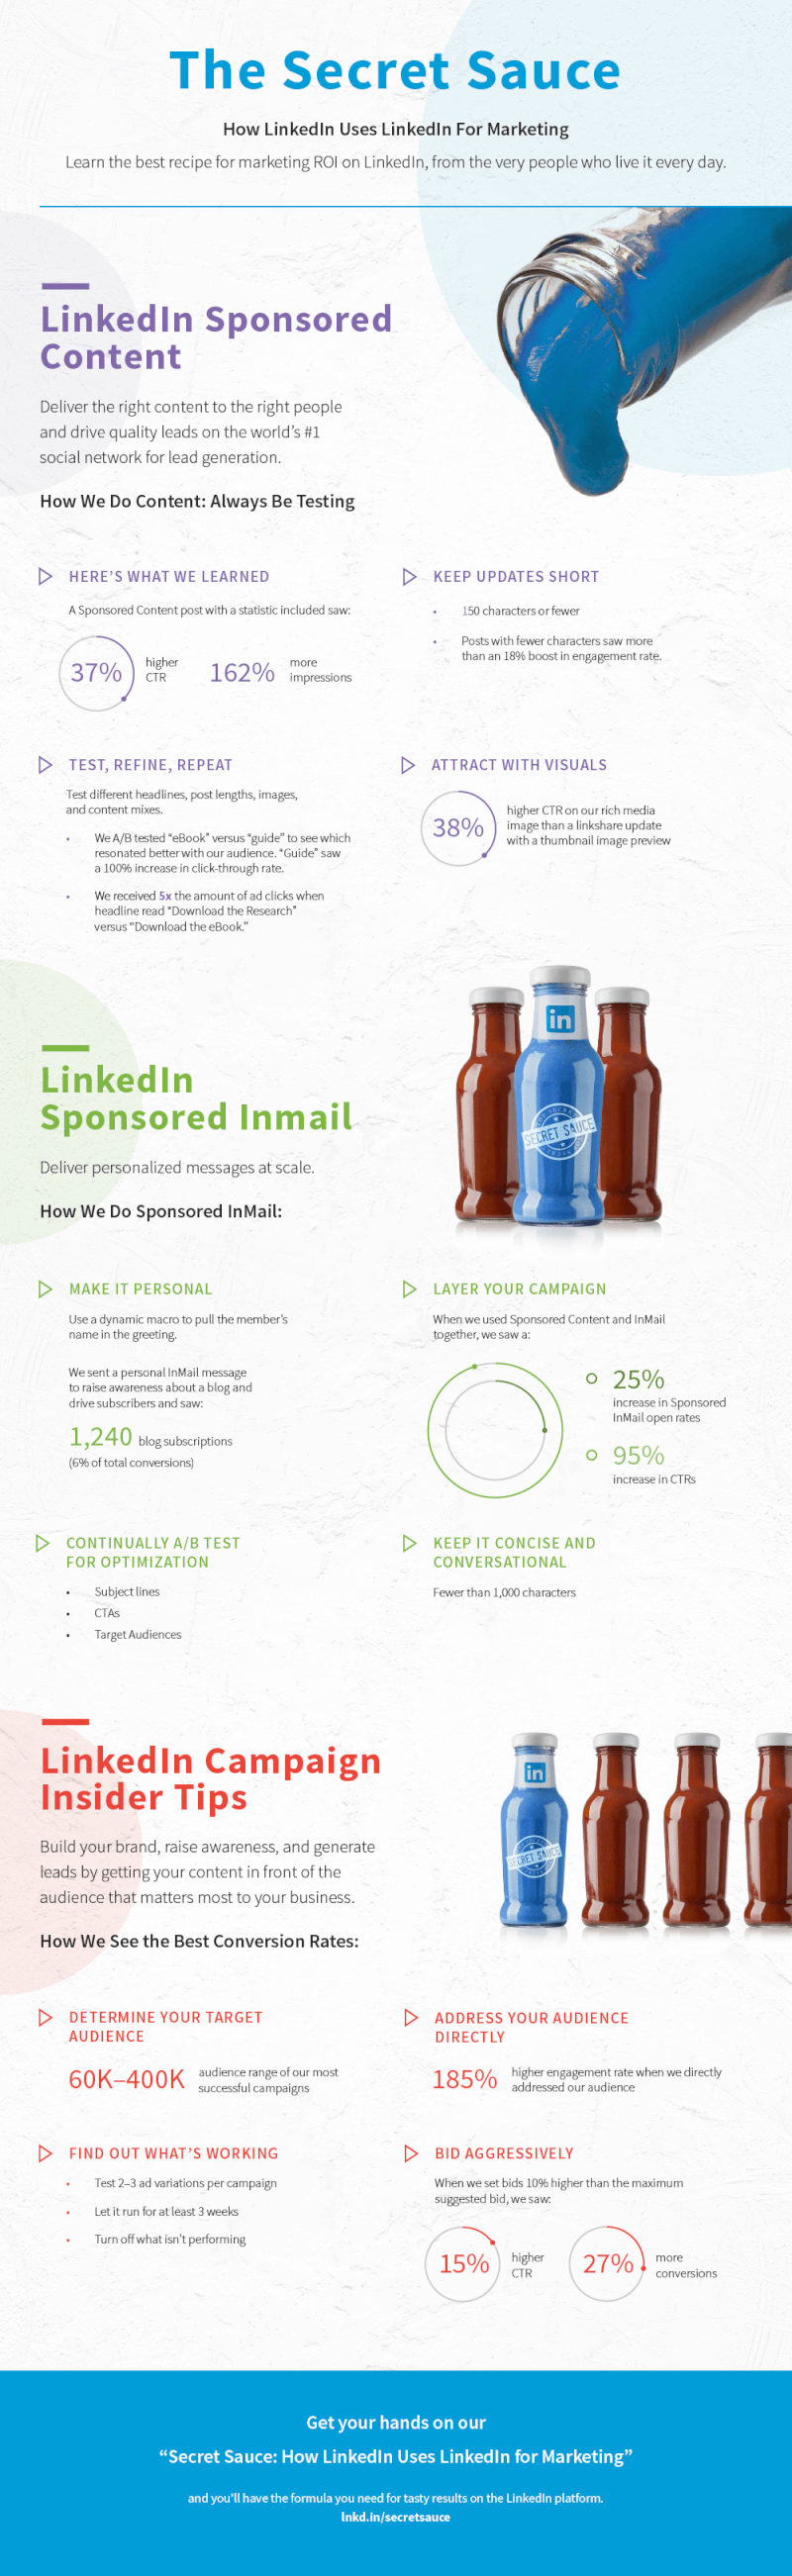 How to Use LinkedIn for Marketing [Infographic]